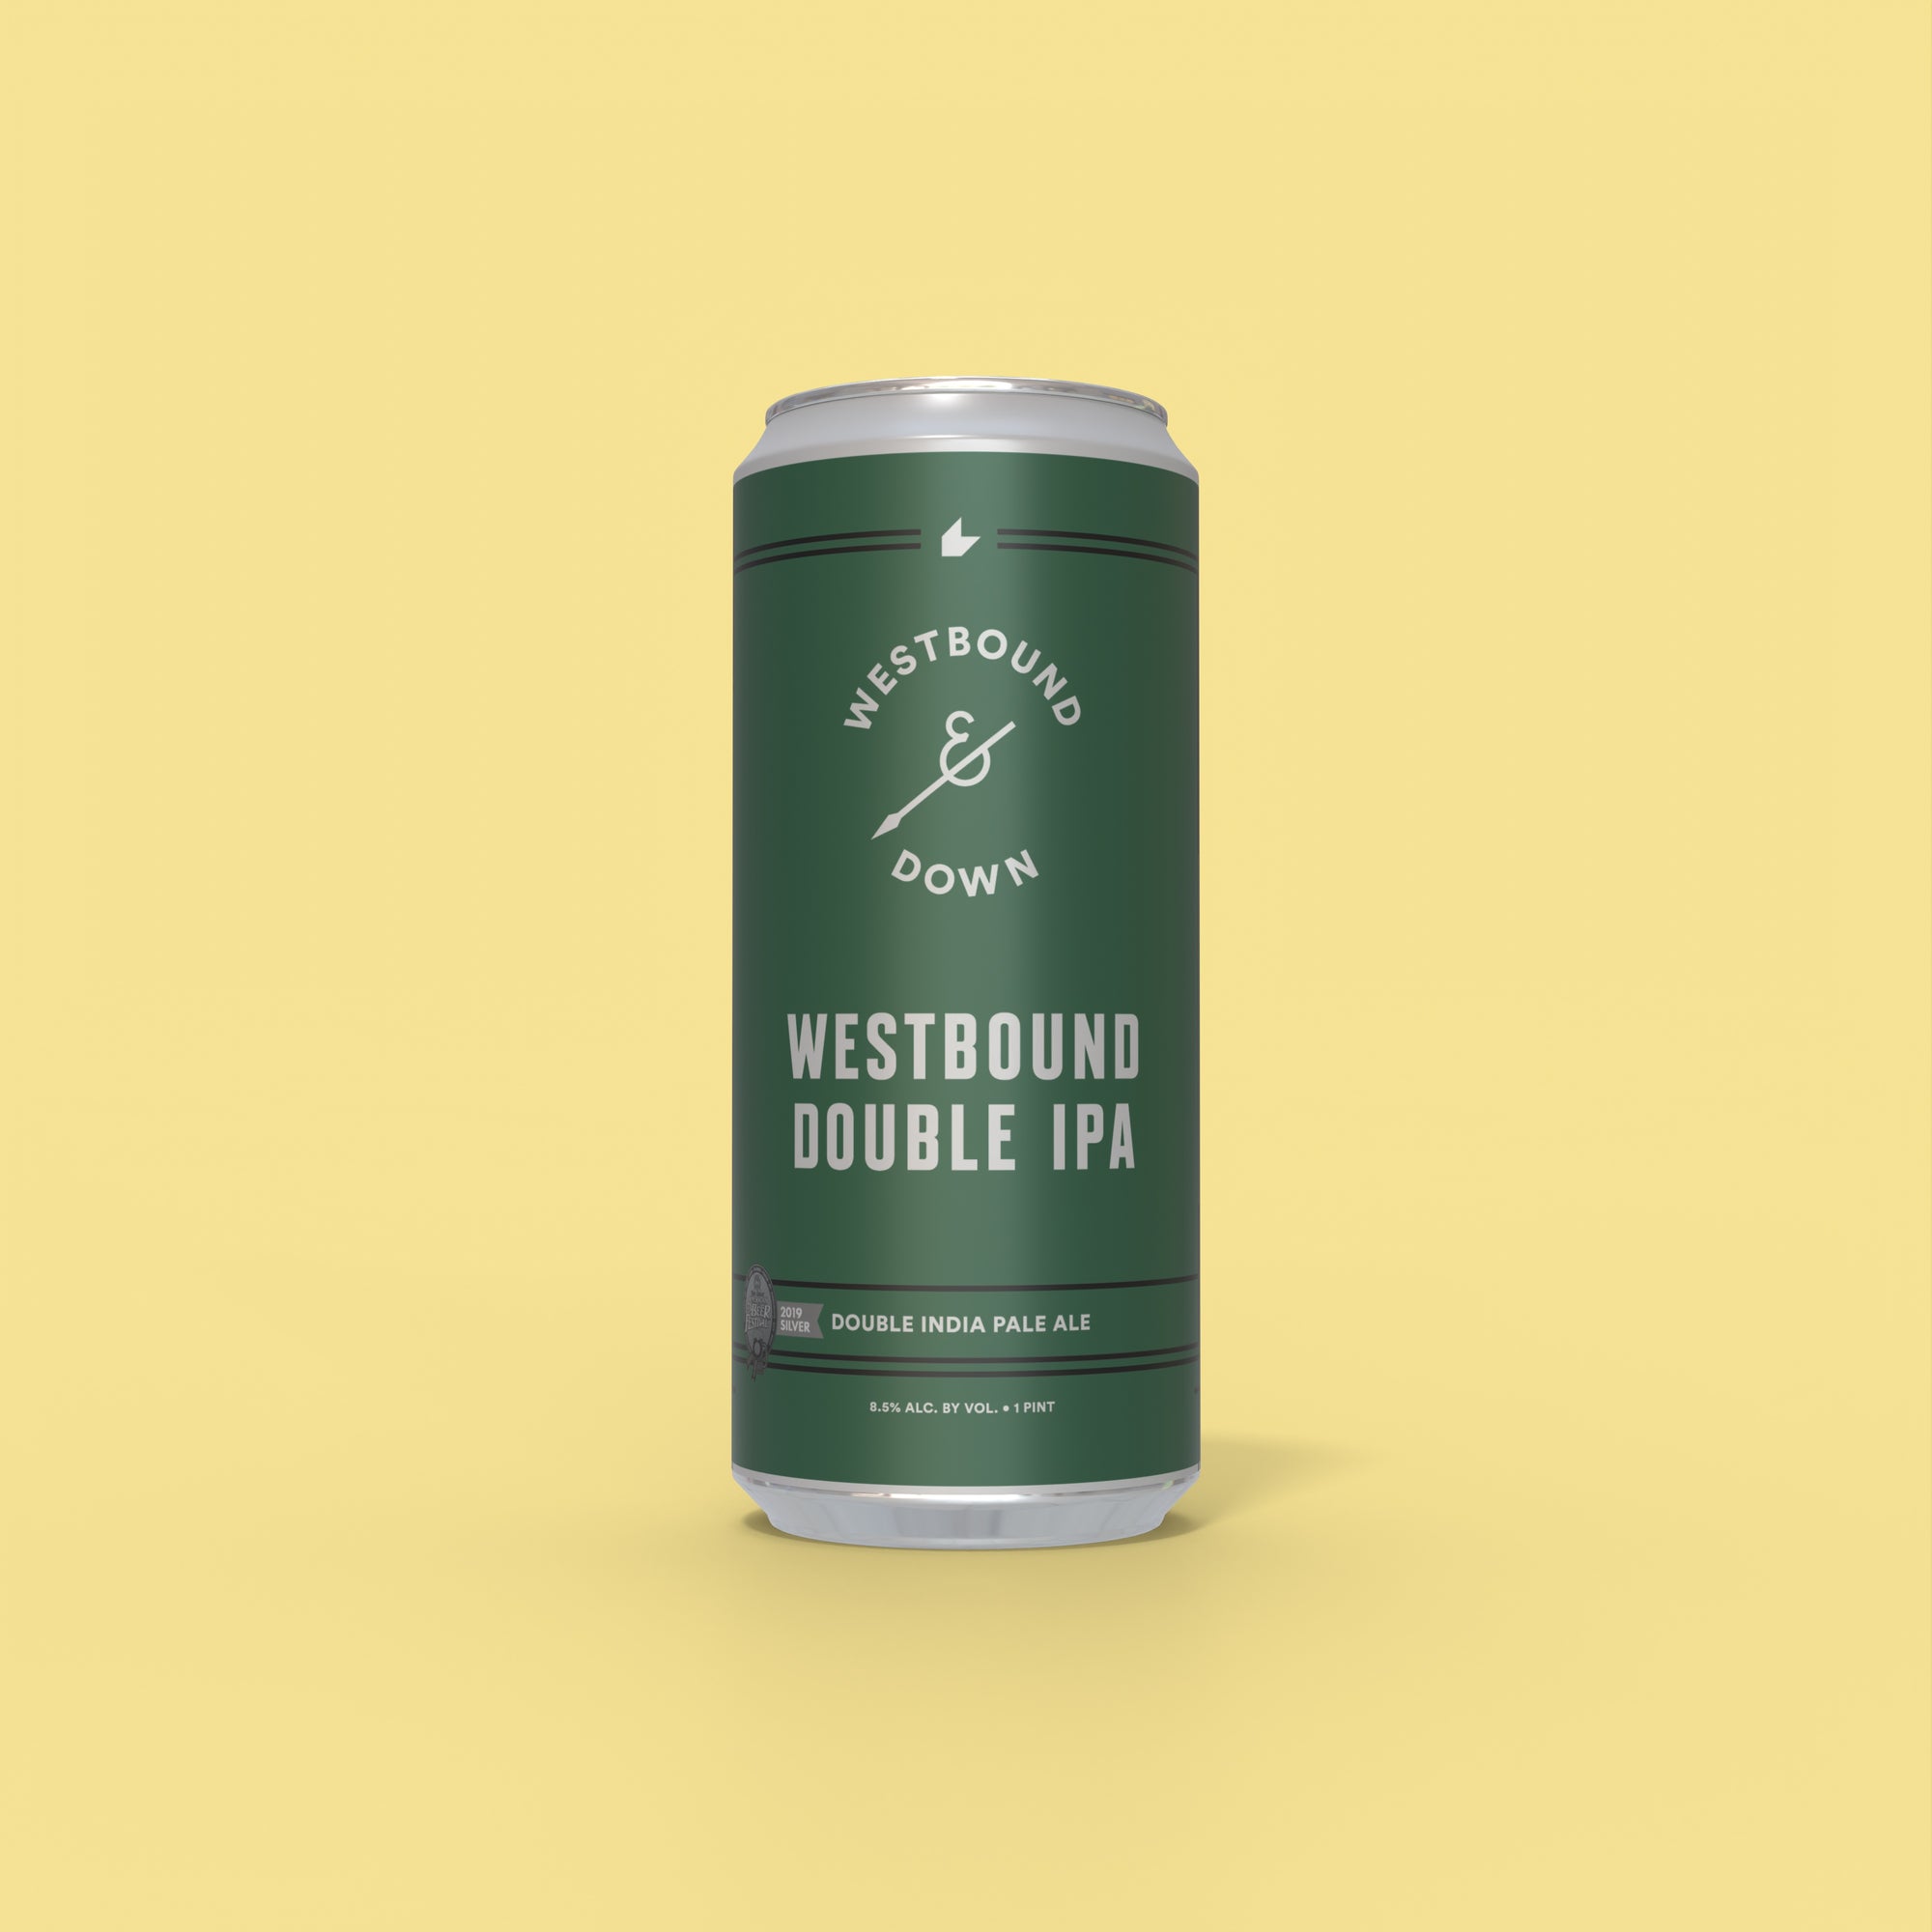 Westbound Double IPA